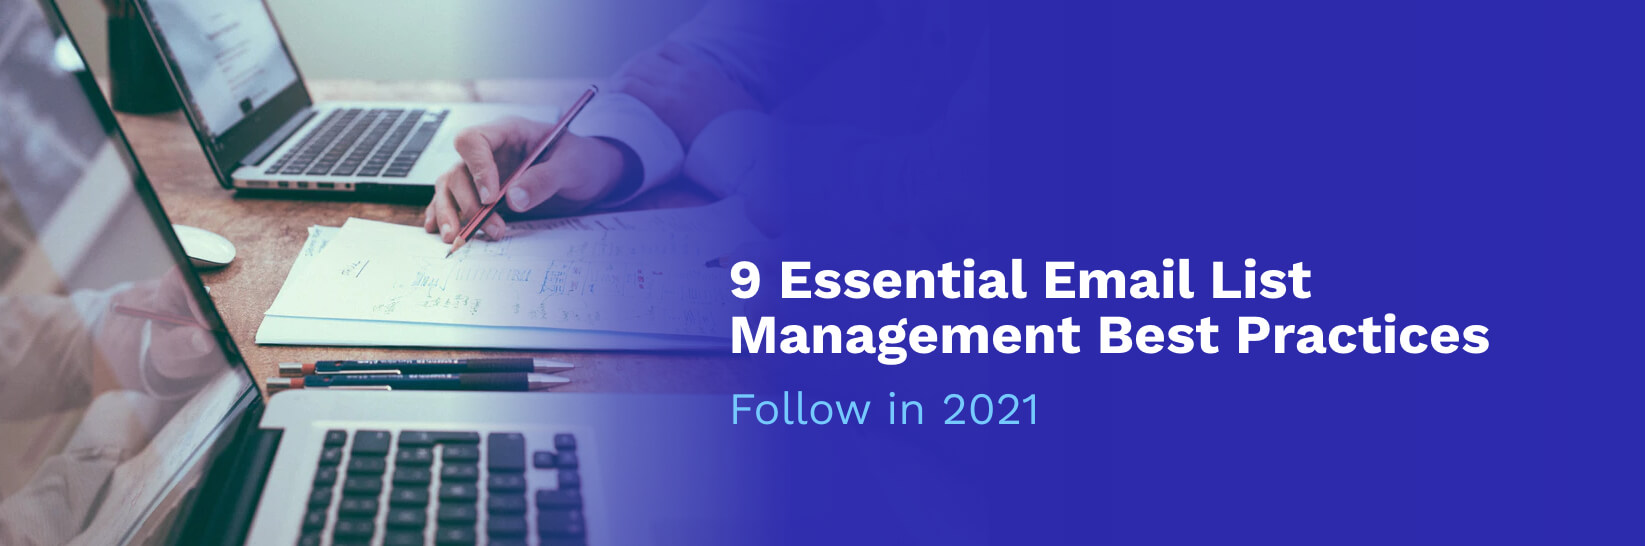 9 Essential Email List Management Best Practices to Follow in 2021